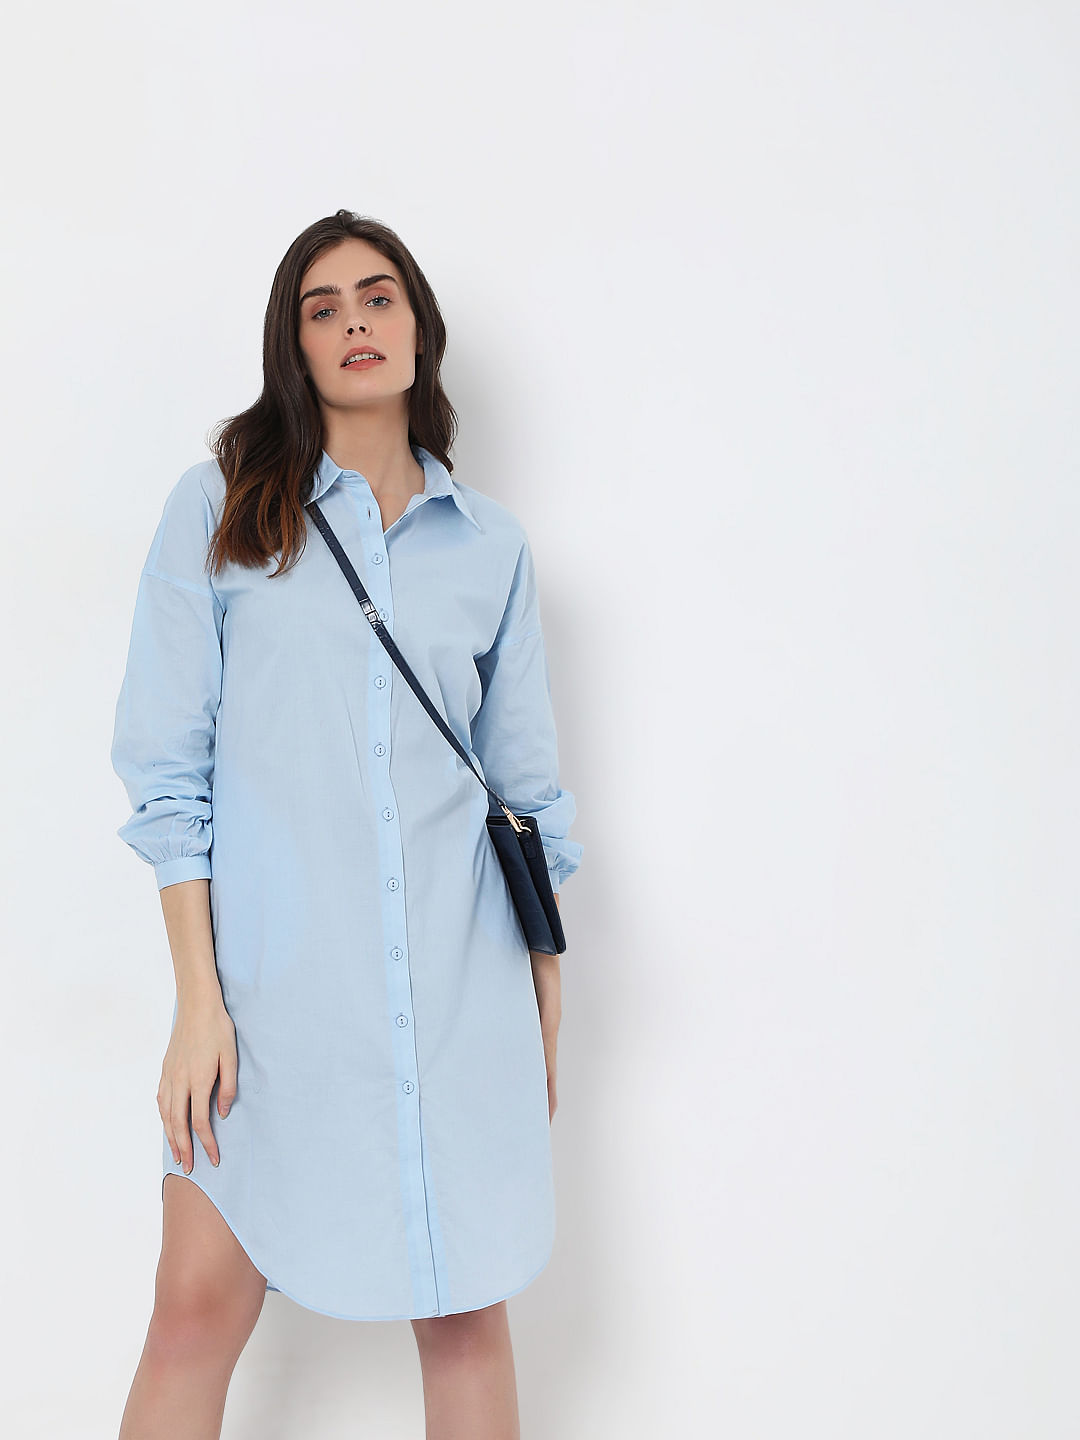 Buy Blue Tunic Shirt Dress Online In India.